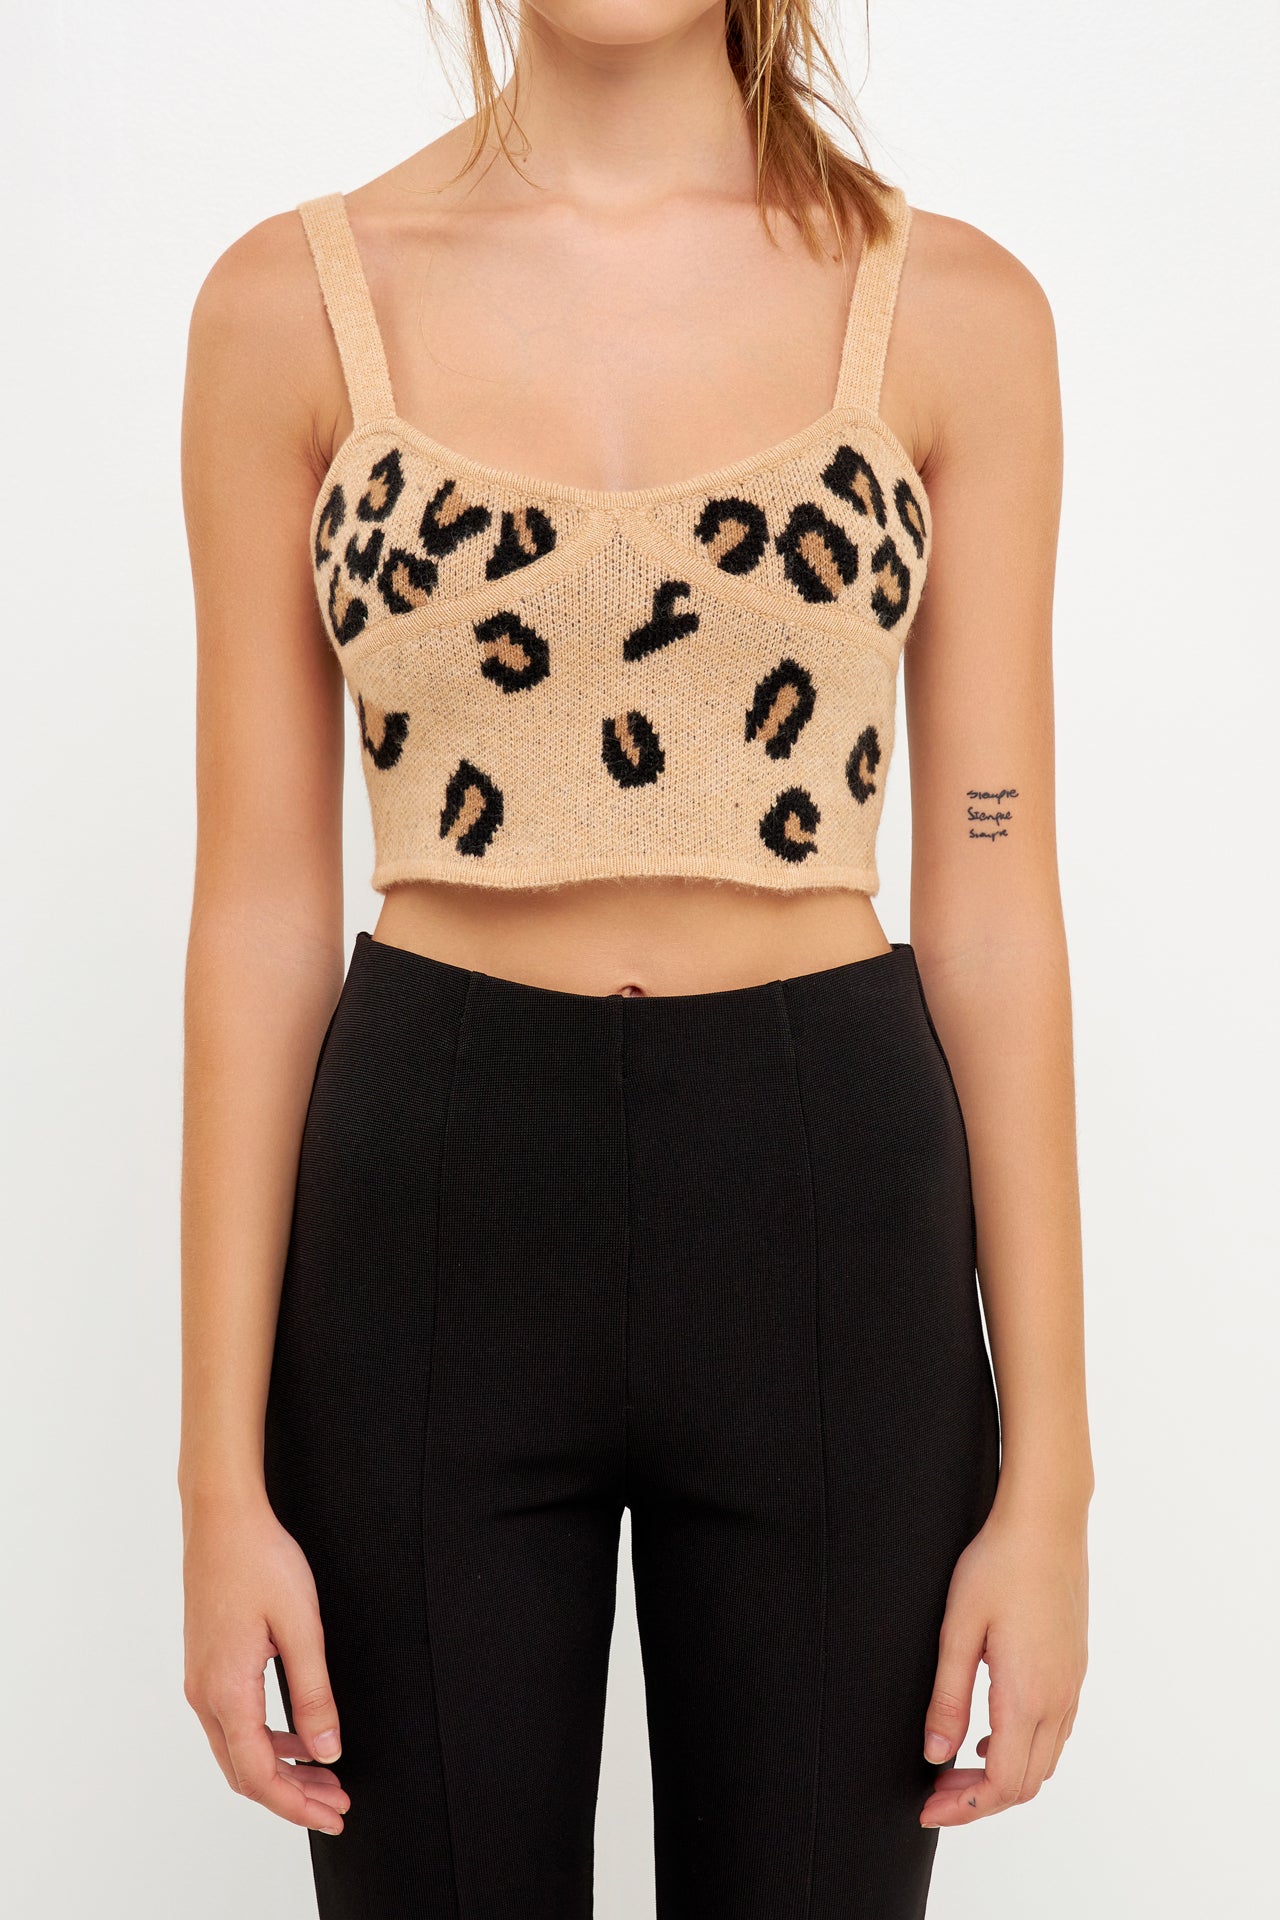 GREY LAB - Leopard Bustier Knit - CAMI TOPS & TANK available at Objectrare